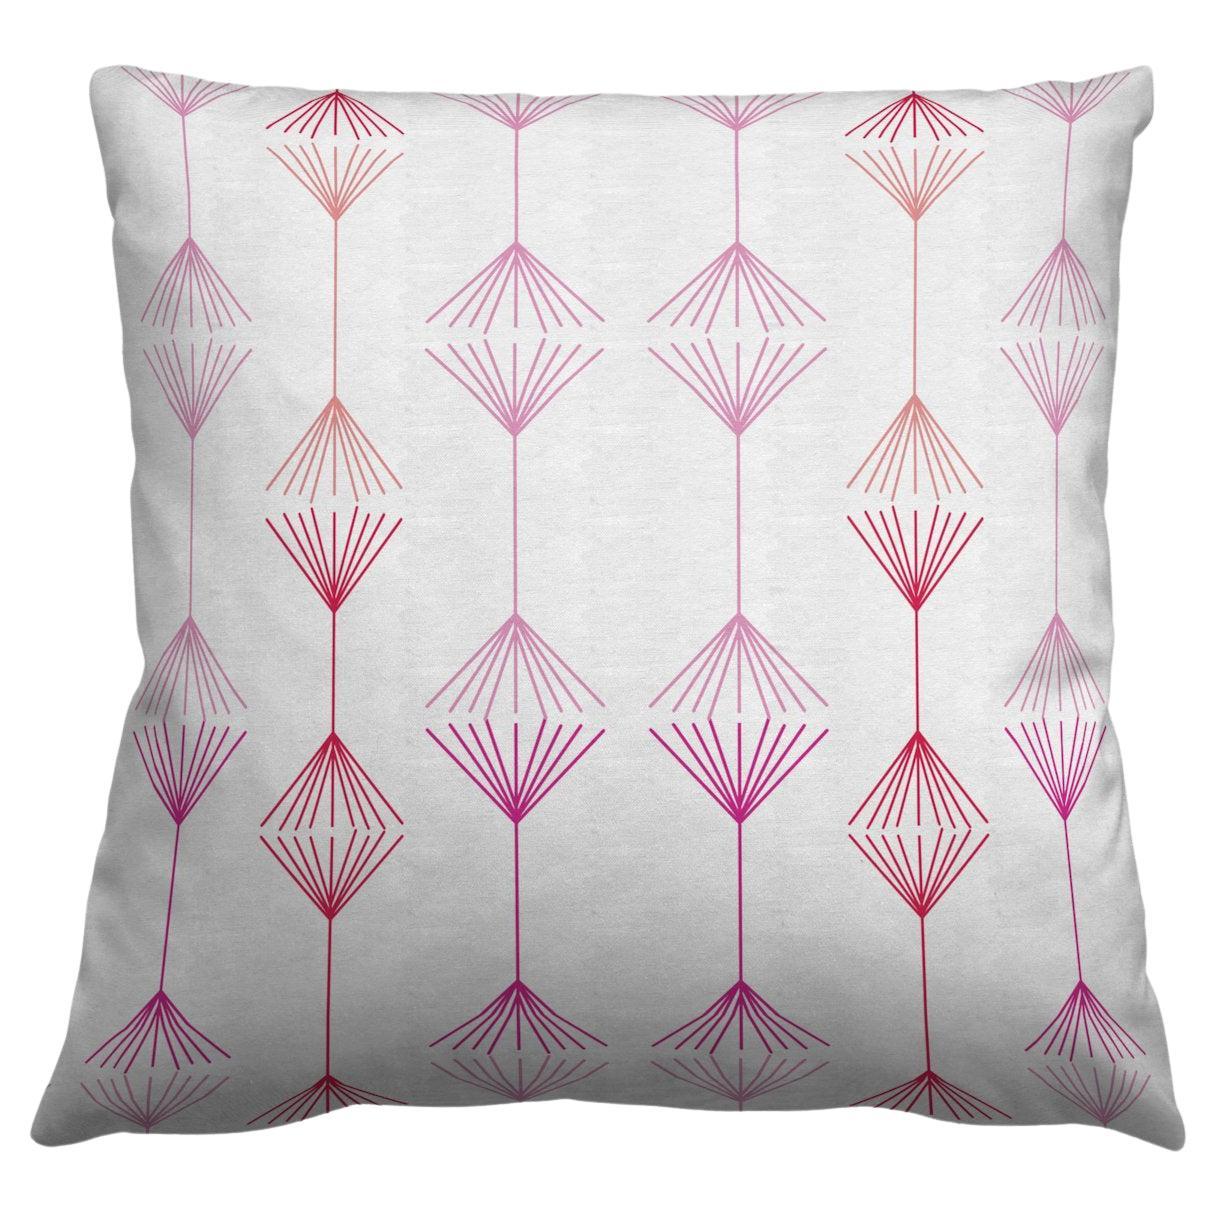 Jumping the Broom Petite Fuchsia Pillow For Sale